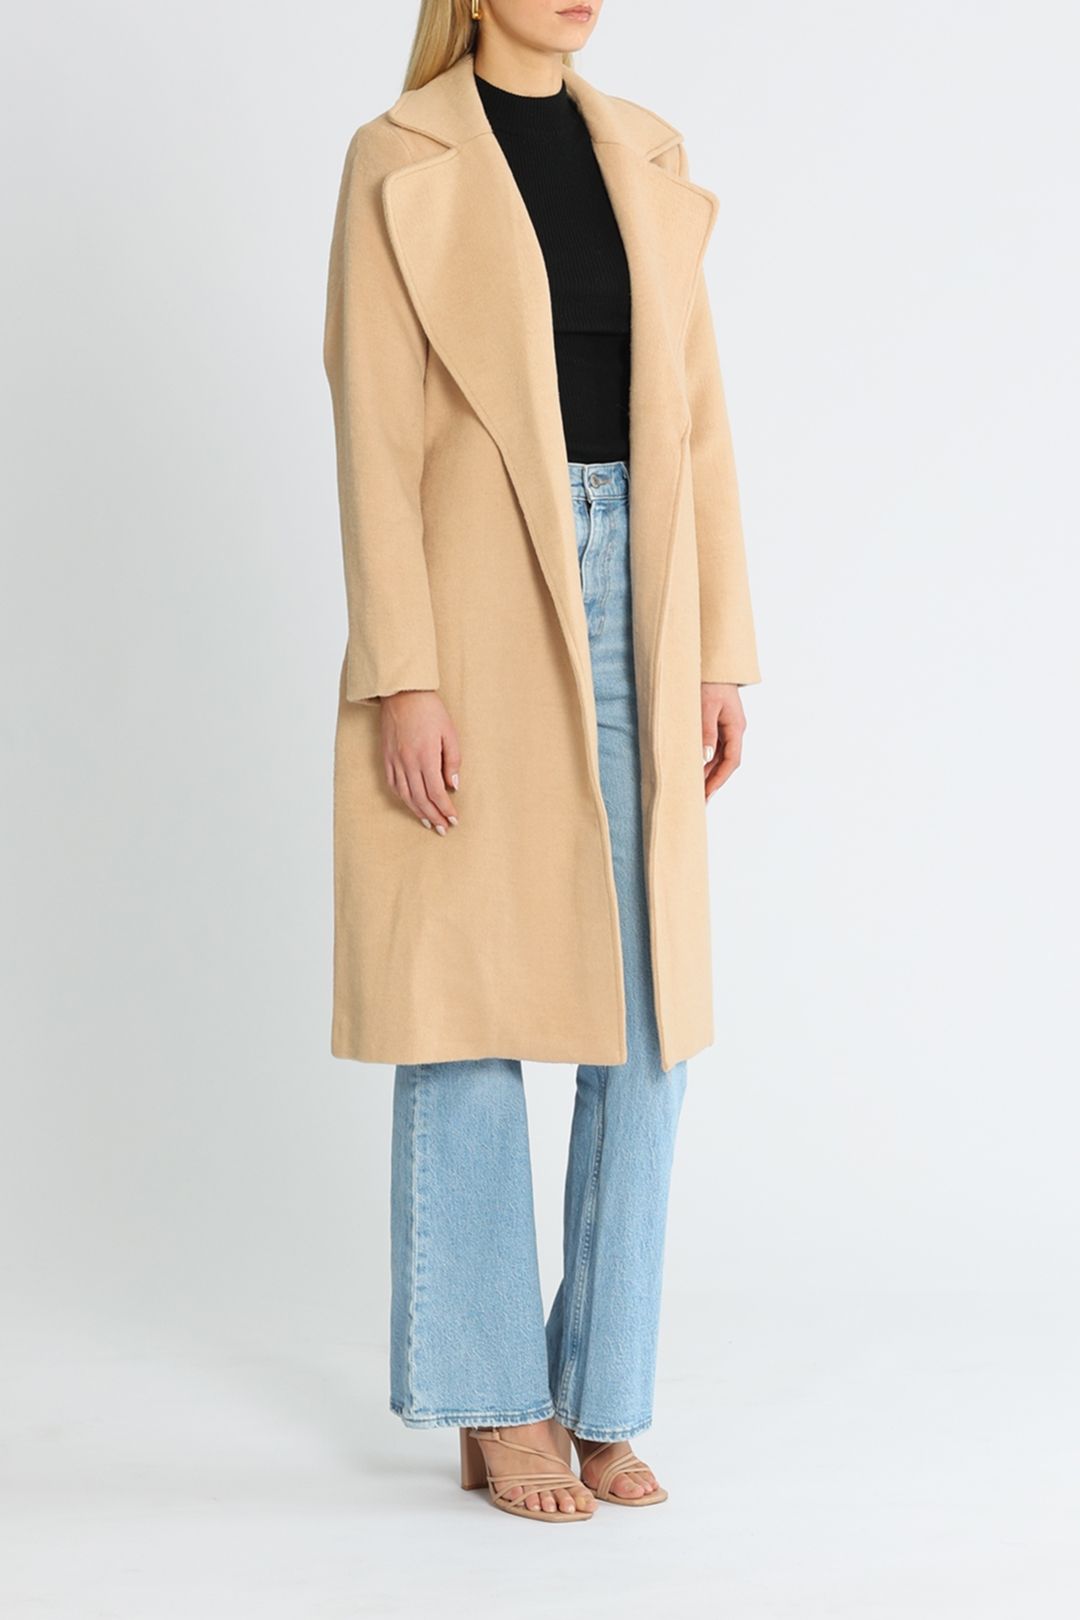 Staple The Label Levy Belted Coat beige